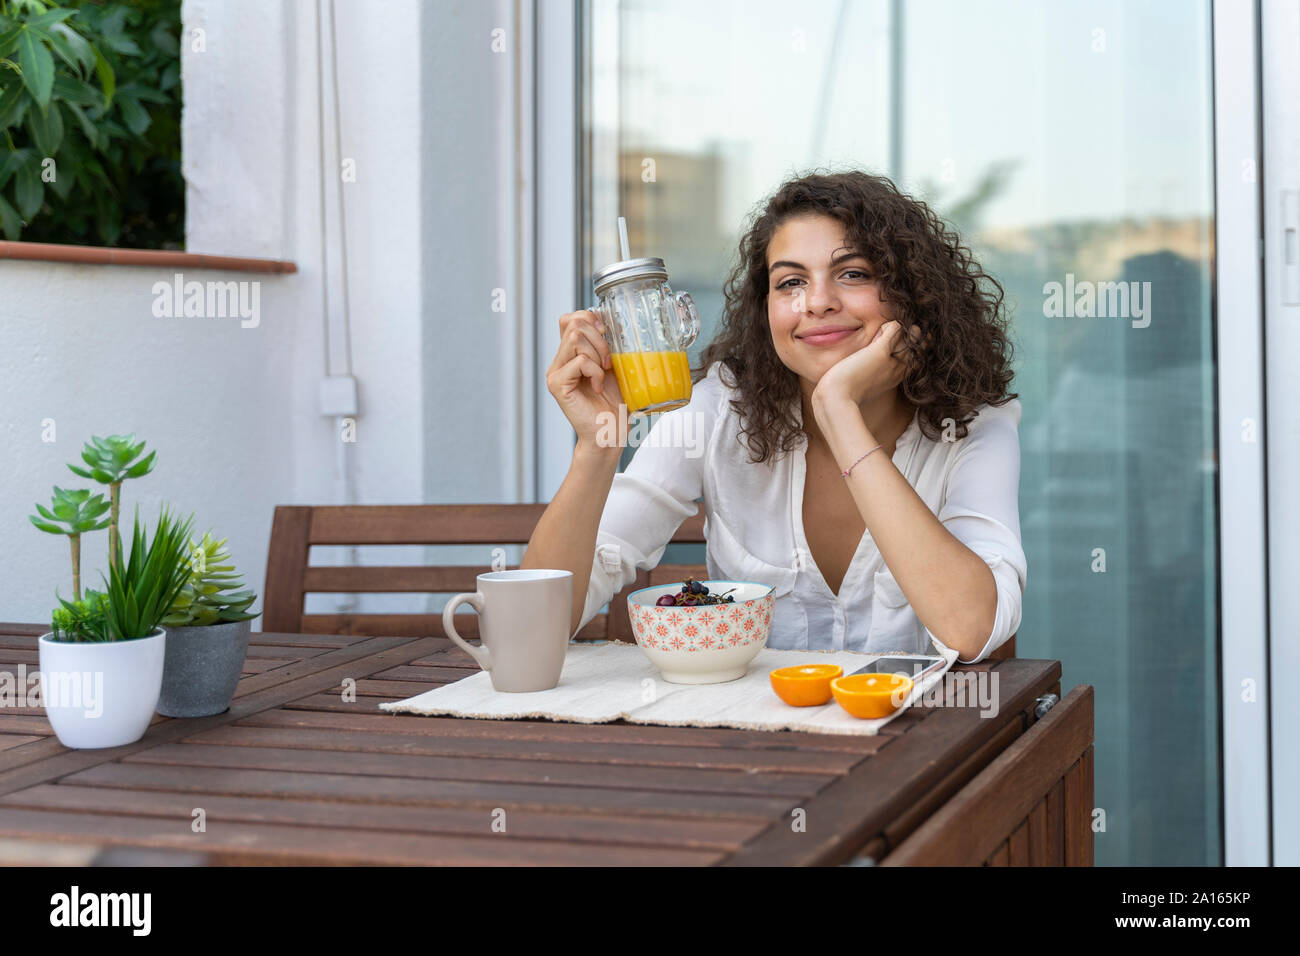 Portrait of smiling young woman with orange juice on balcony Stock Photo